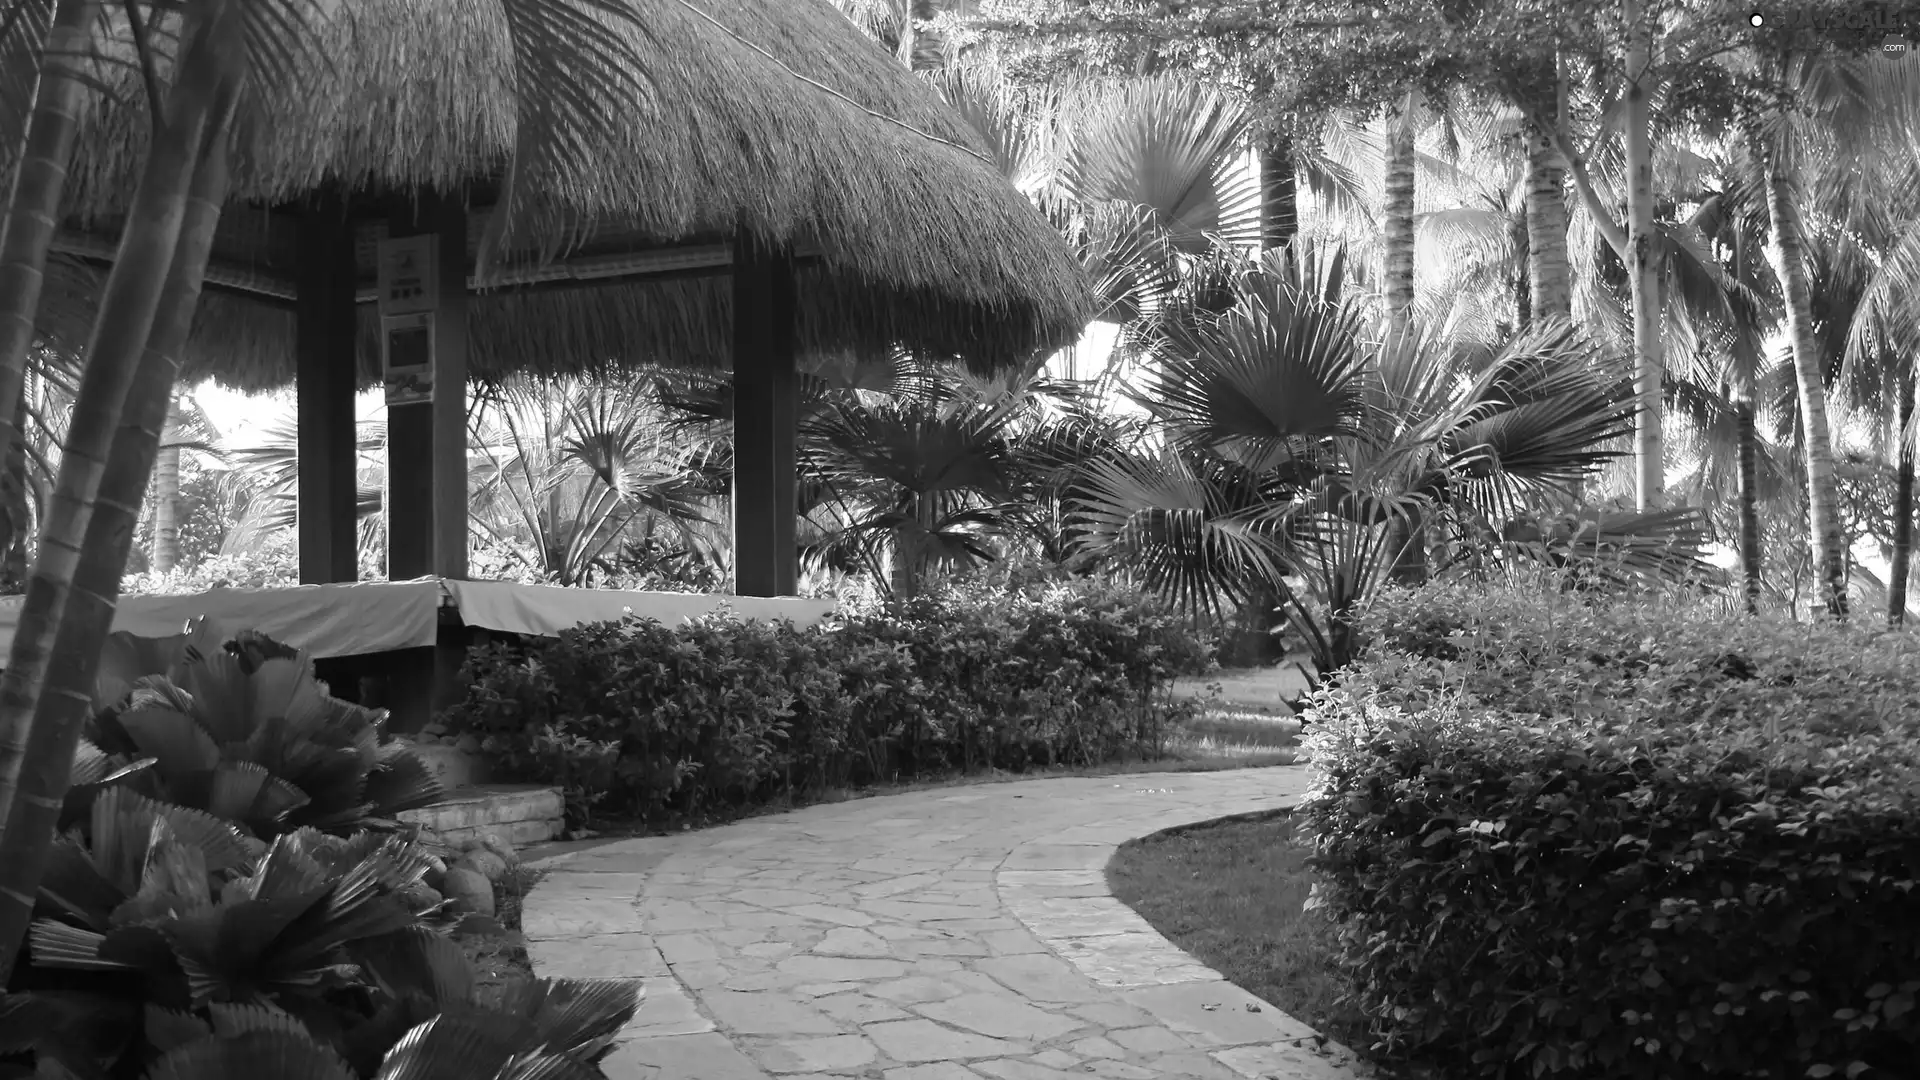 Palms, arbour, trees, viewes, Pavement